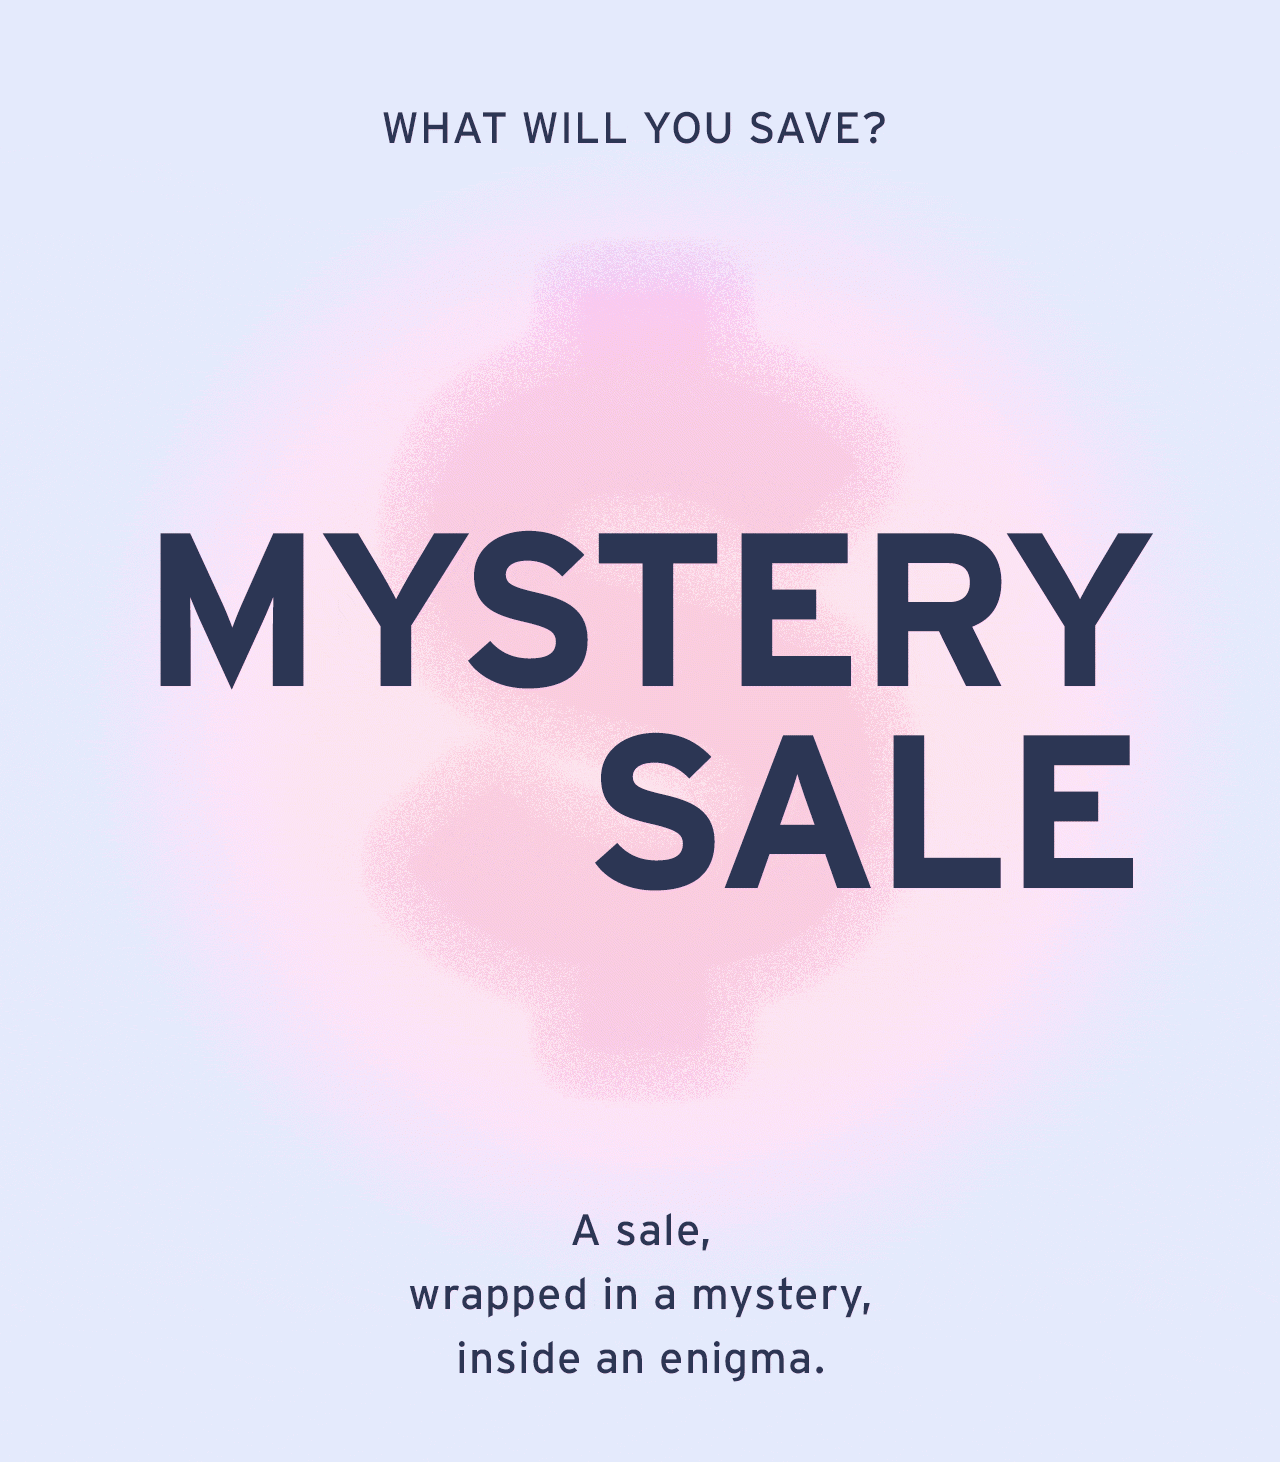 MYSTERY SALE: FIND OUT HOW MUCH YOU WILL SAVE. SHOP NOW